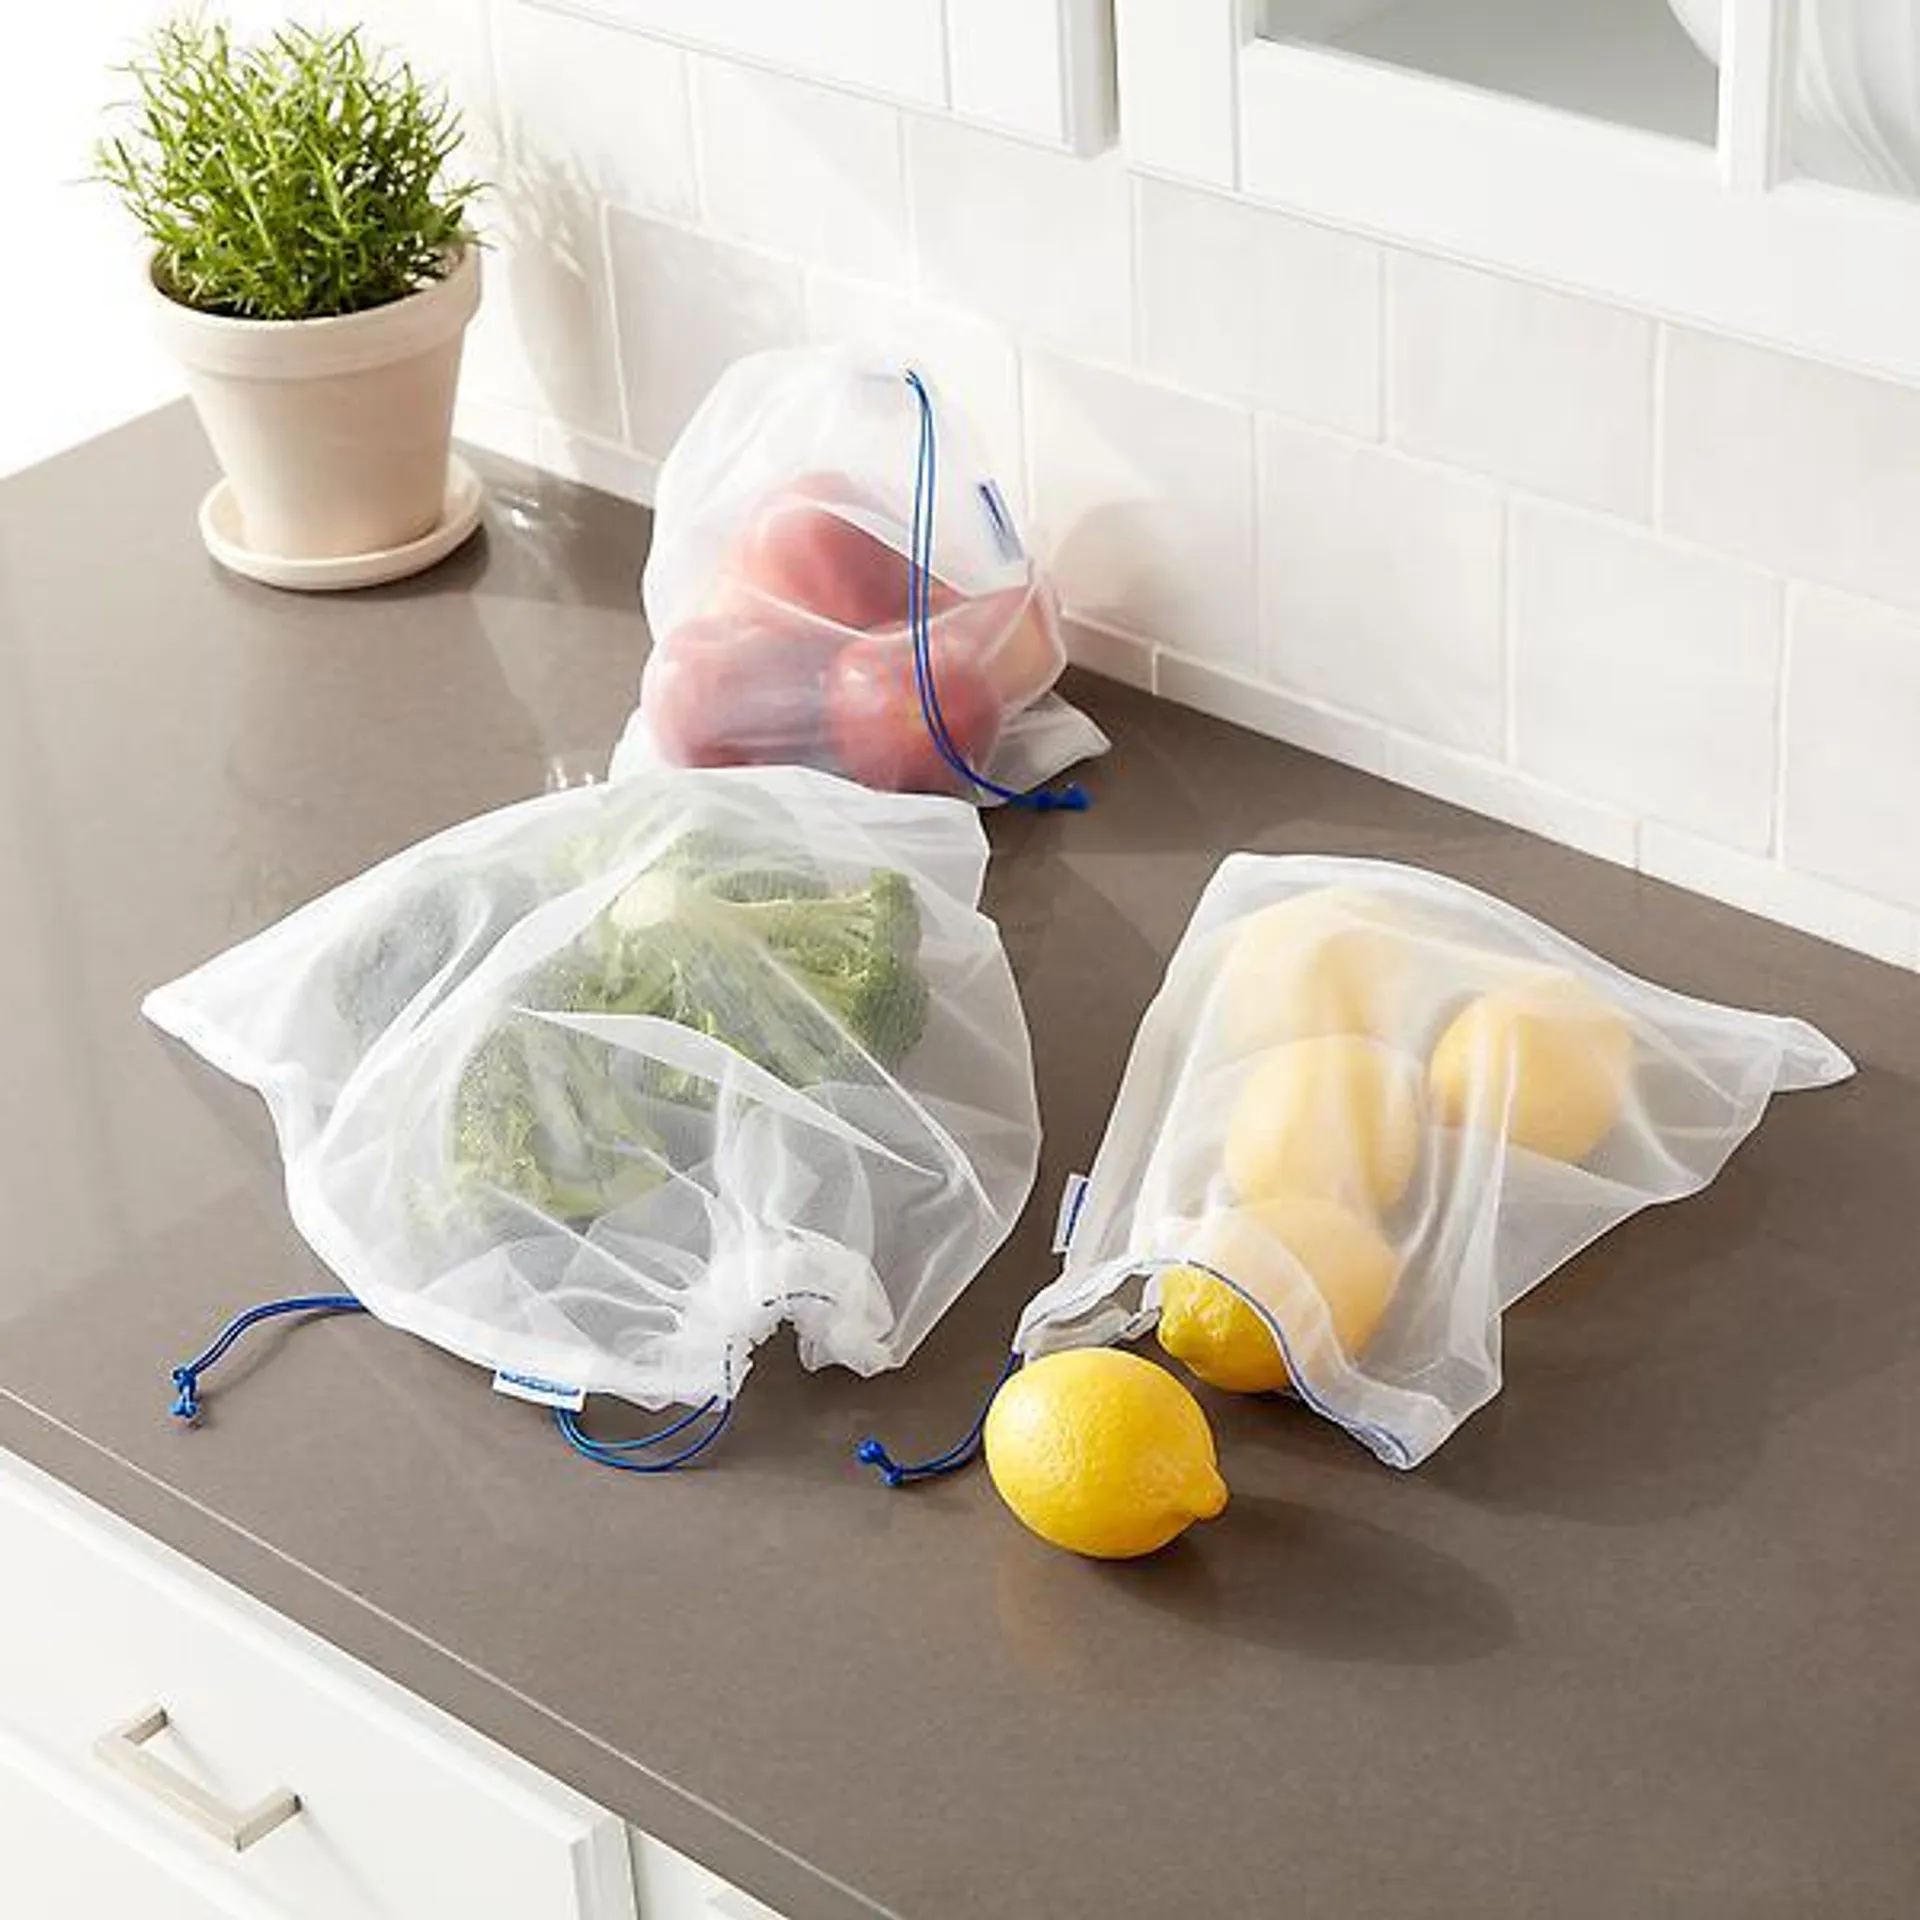 The Container Store Reusable Produce Bags